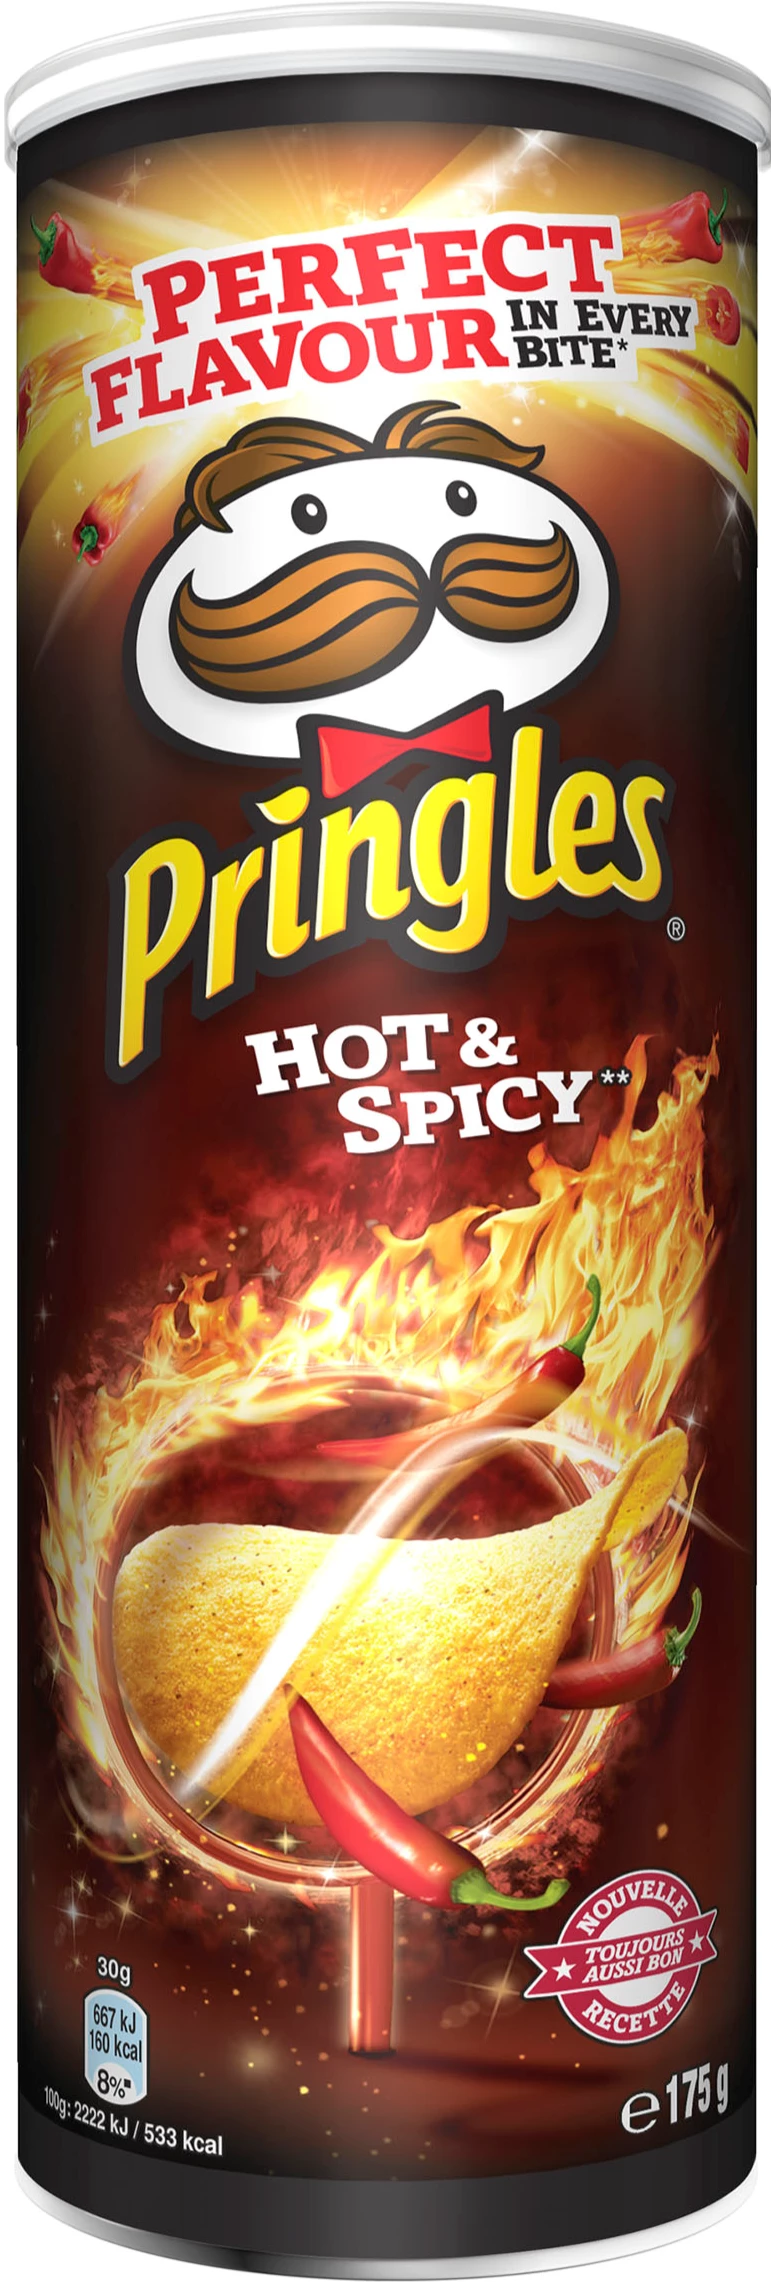 Chips Hot & Spicy, 175g - PRINGLES